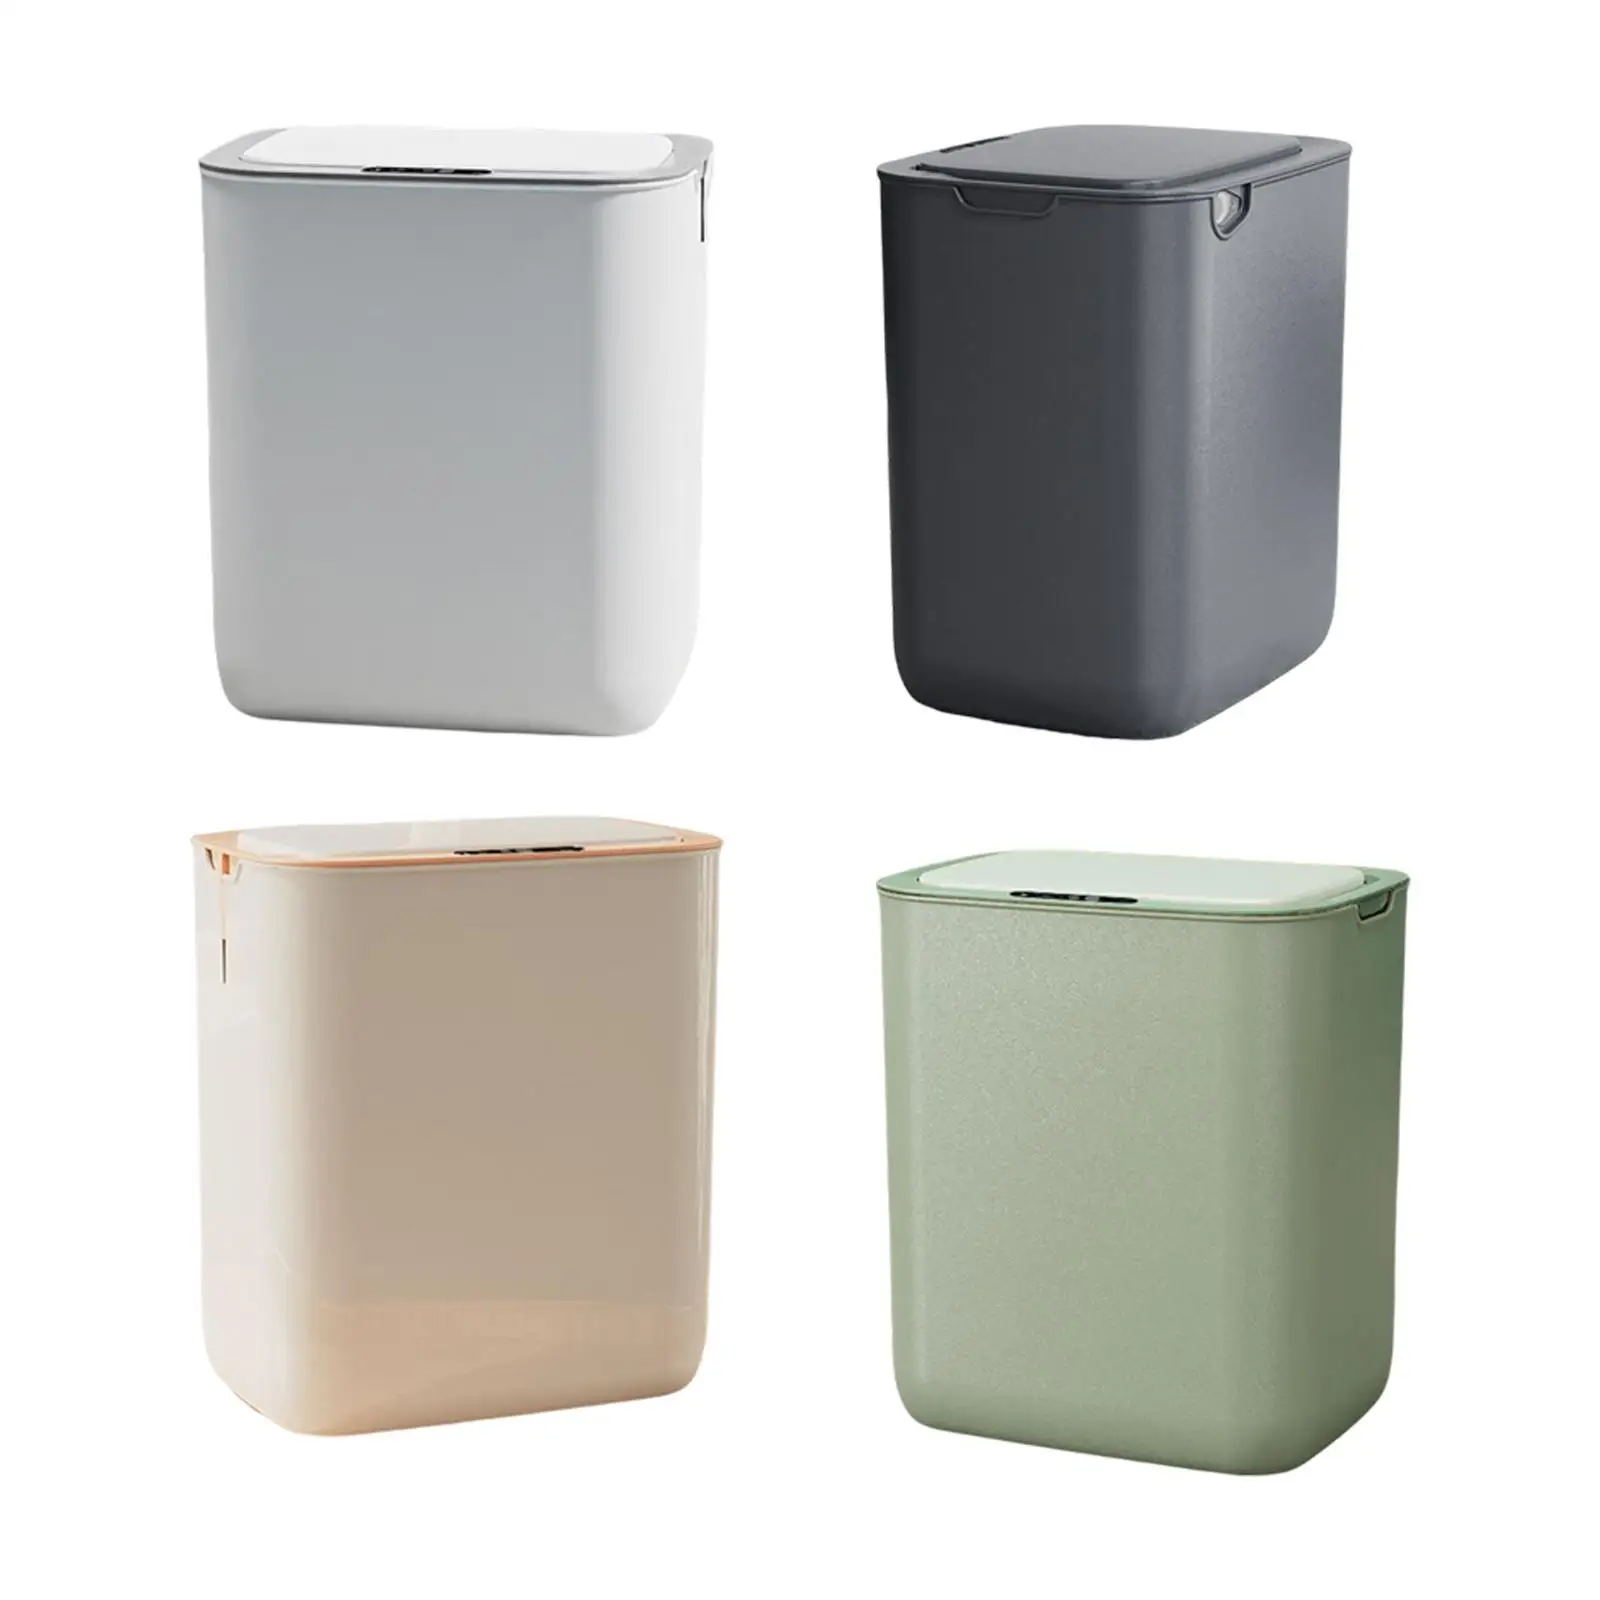 Smart Induction Trash can Large Capacity Trash Can with Lid Rubbish Bin Electric Bin for Office Living Room Bedroom